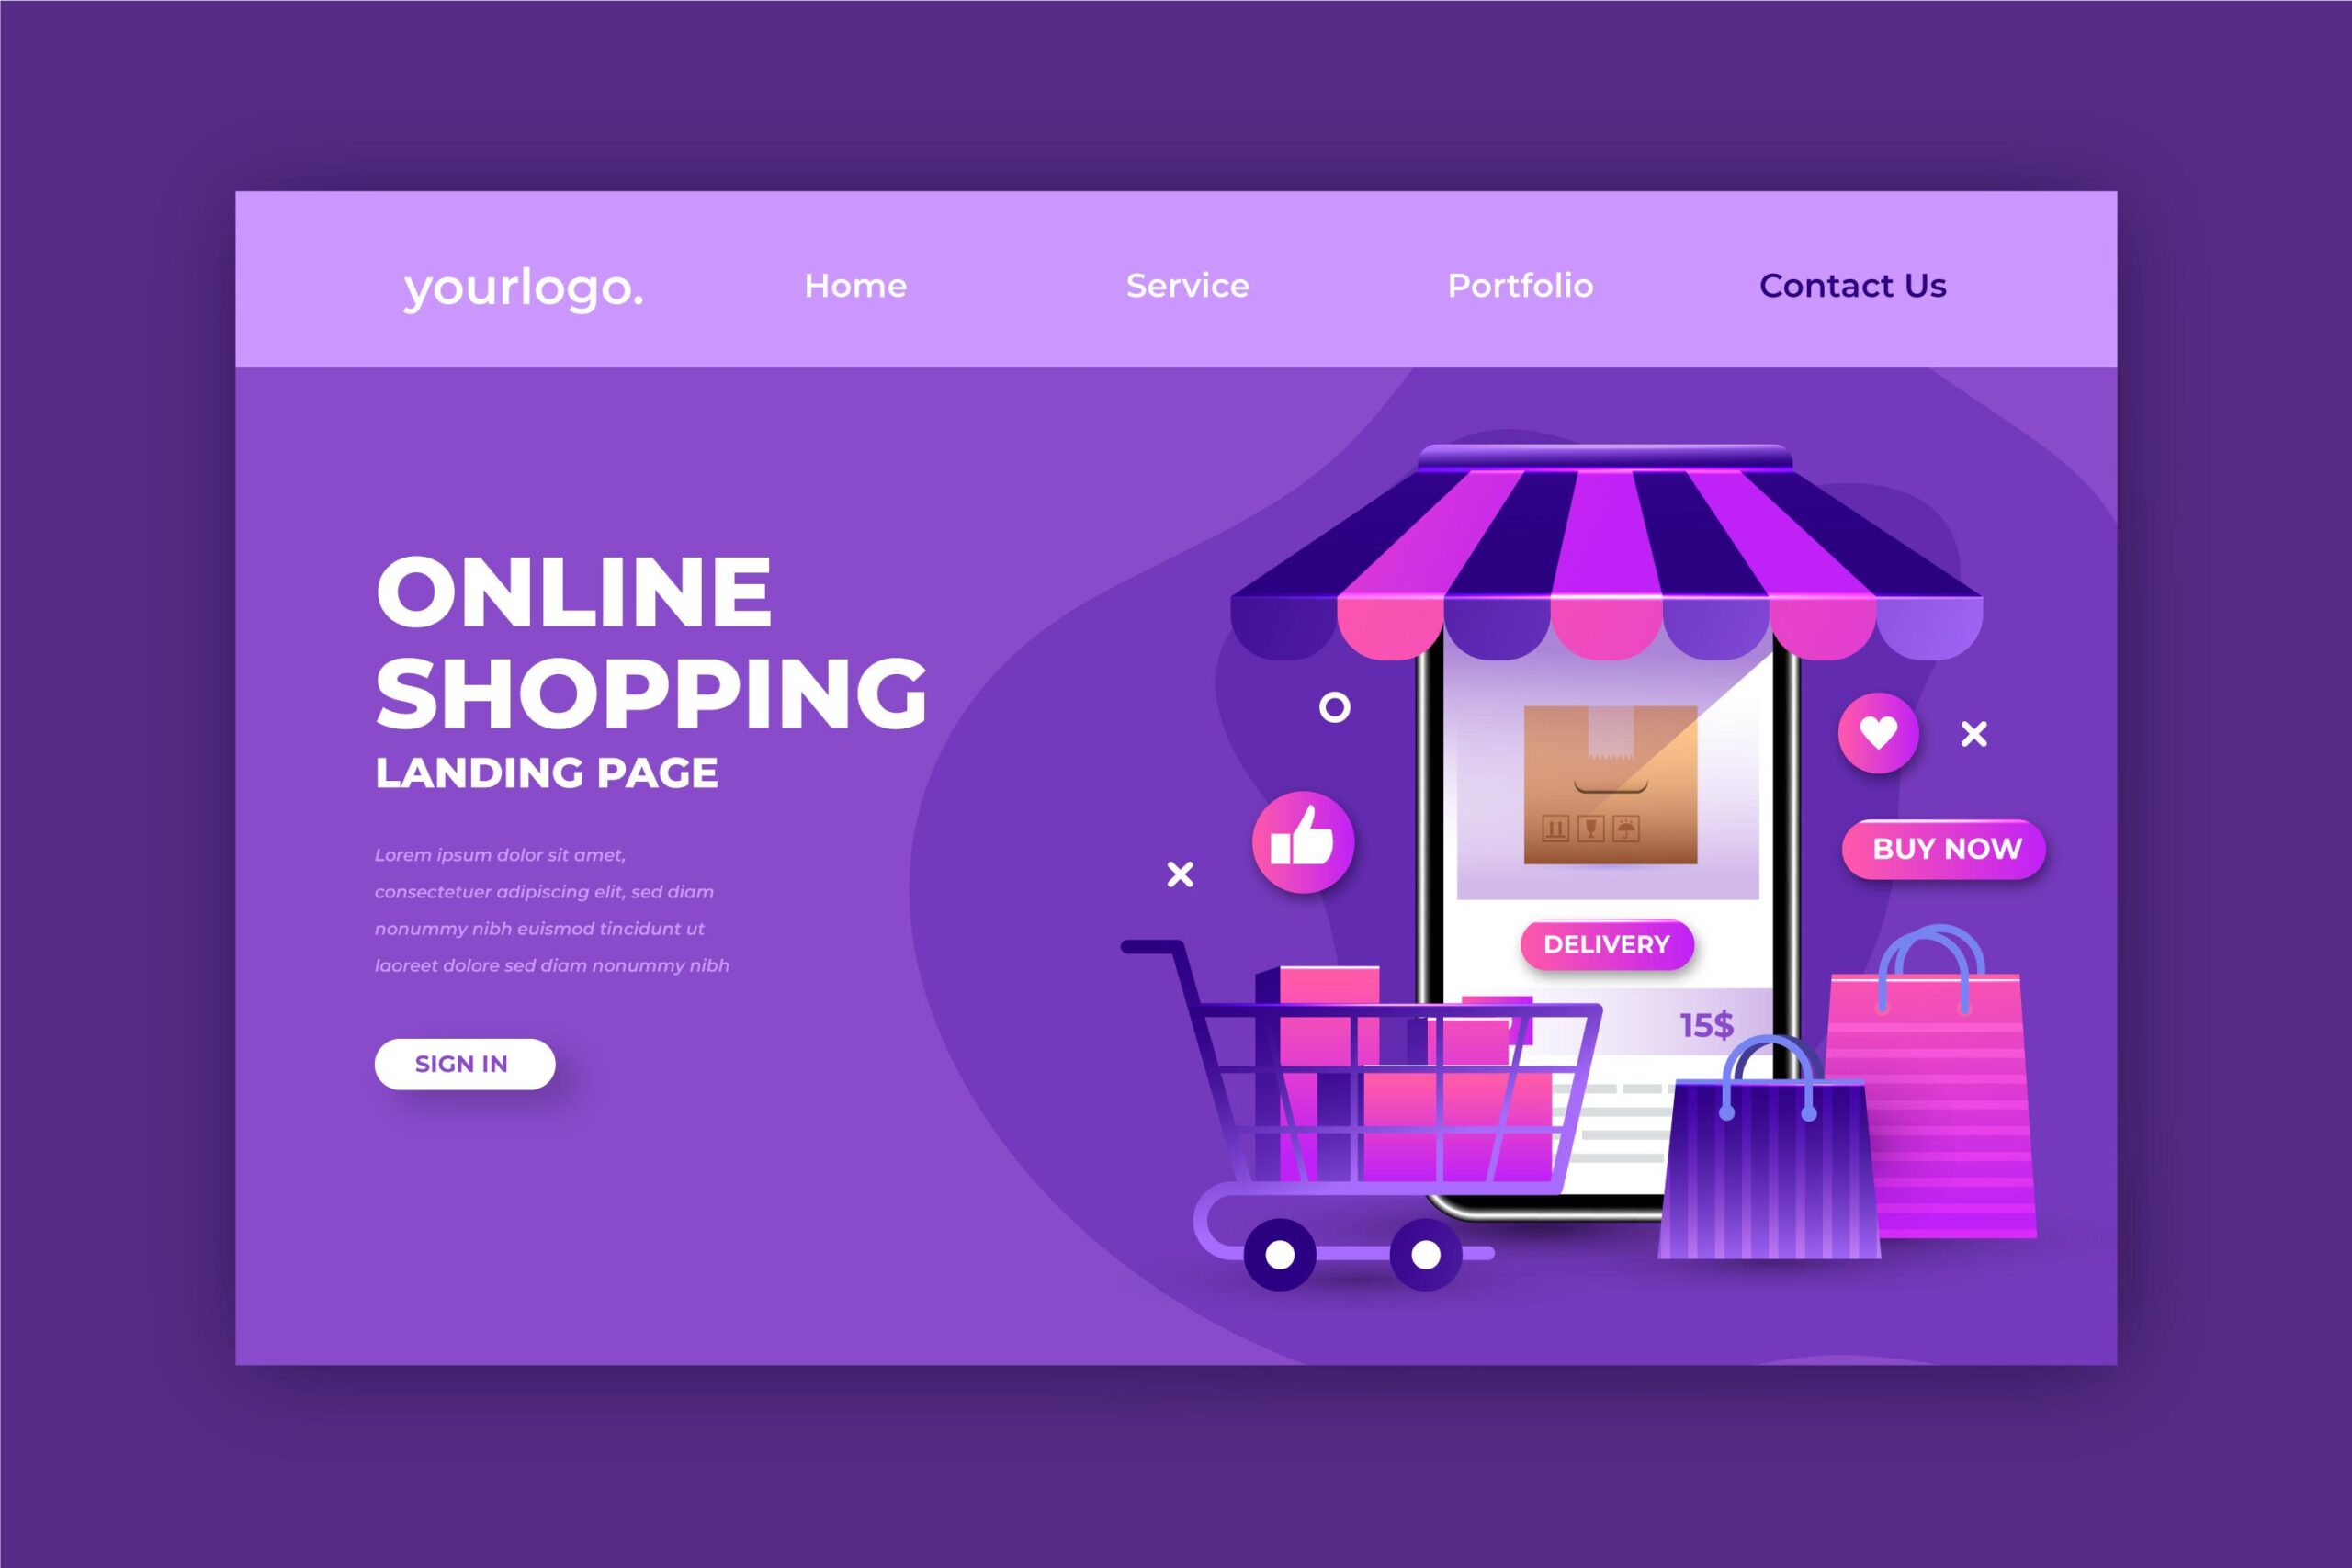 How to Pick the Right Ecommerce Type for a Business